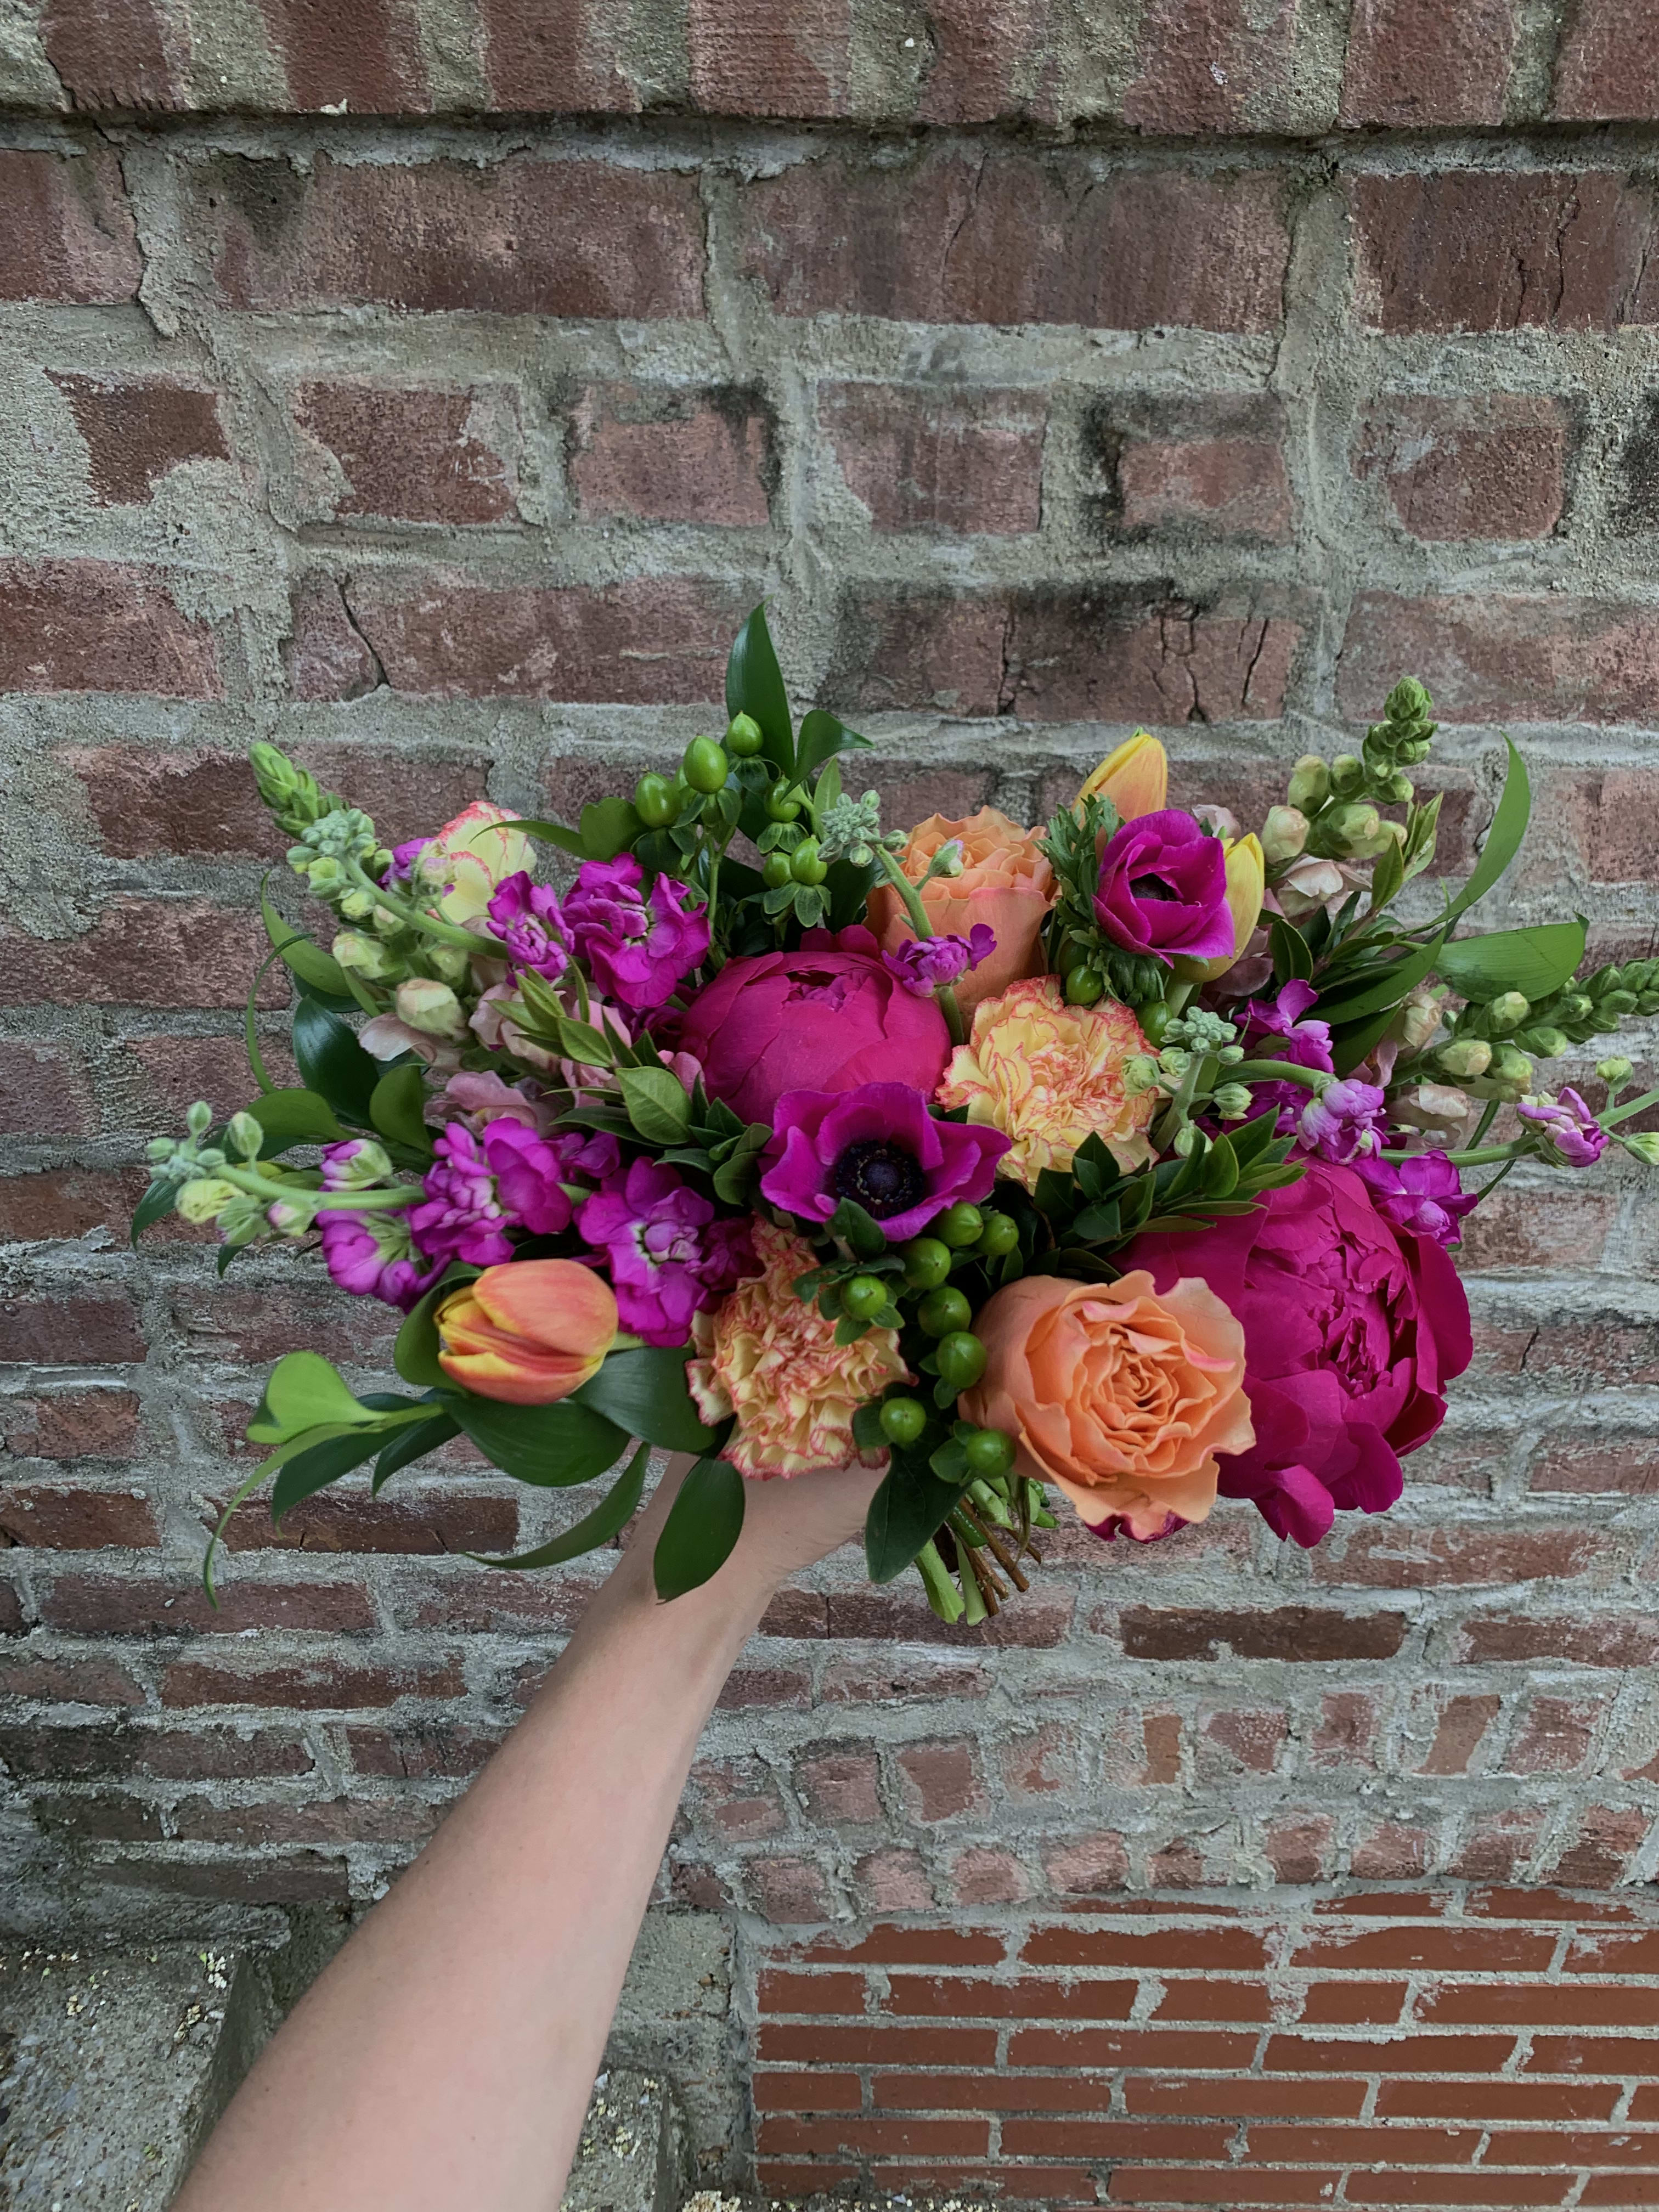 Fuchsia Fun - Snapdragons, peonies, and free spirit roses compliment each other and make this a premium but unique arrangement.